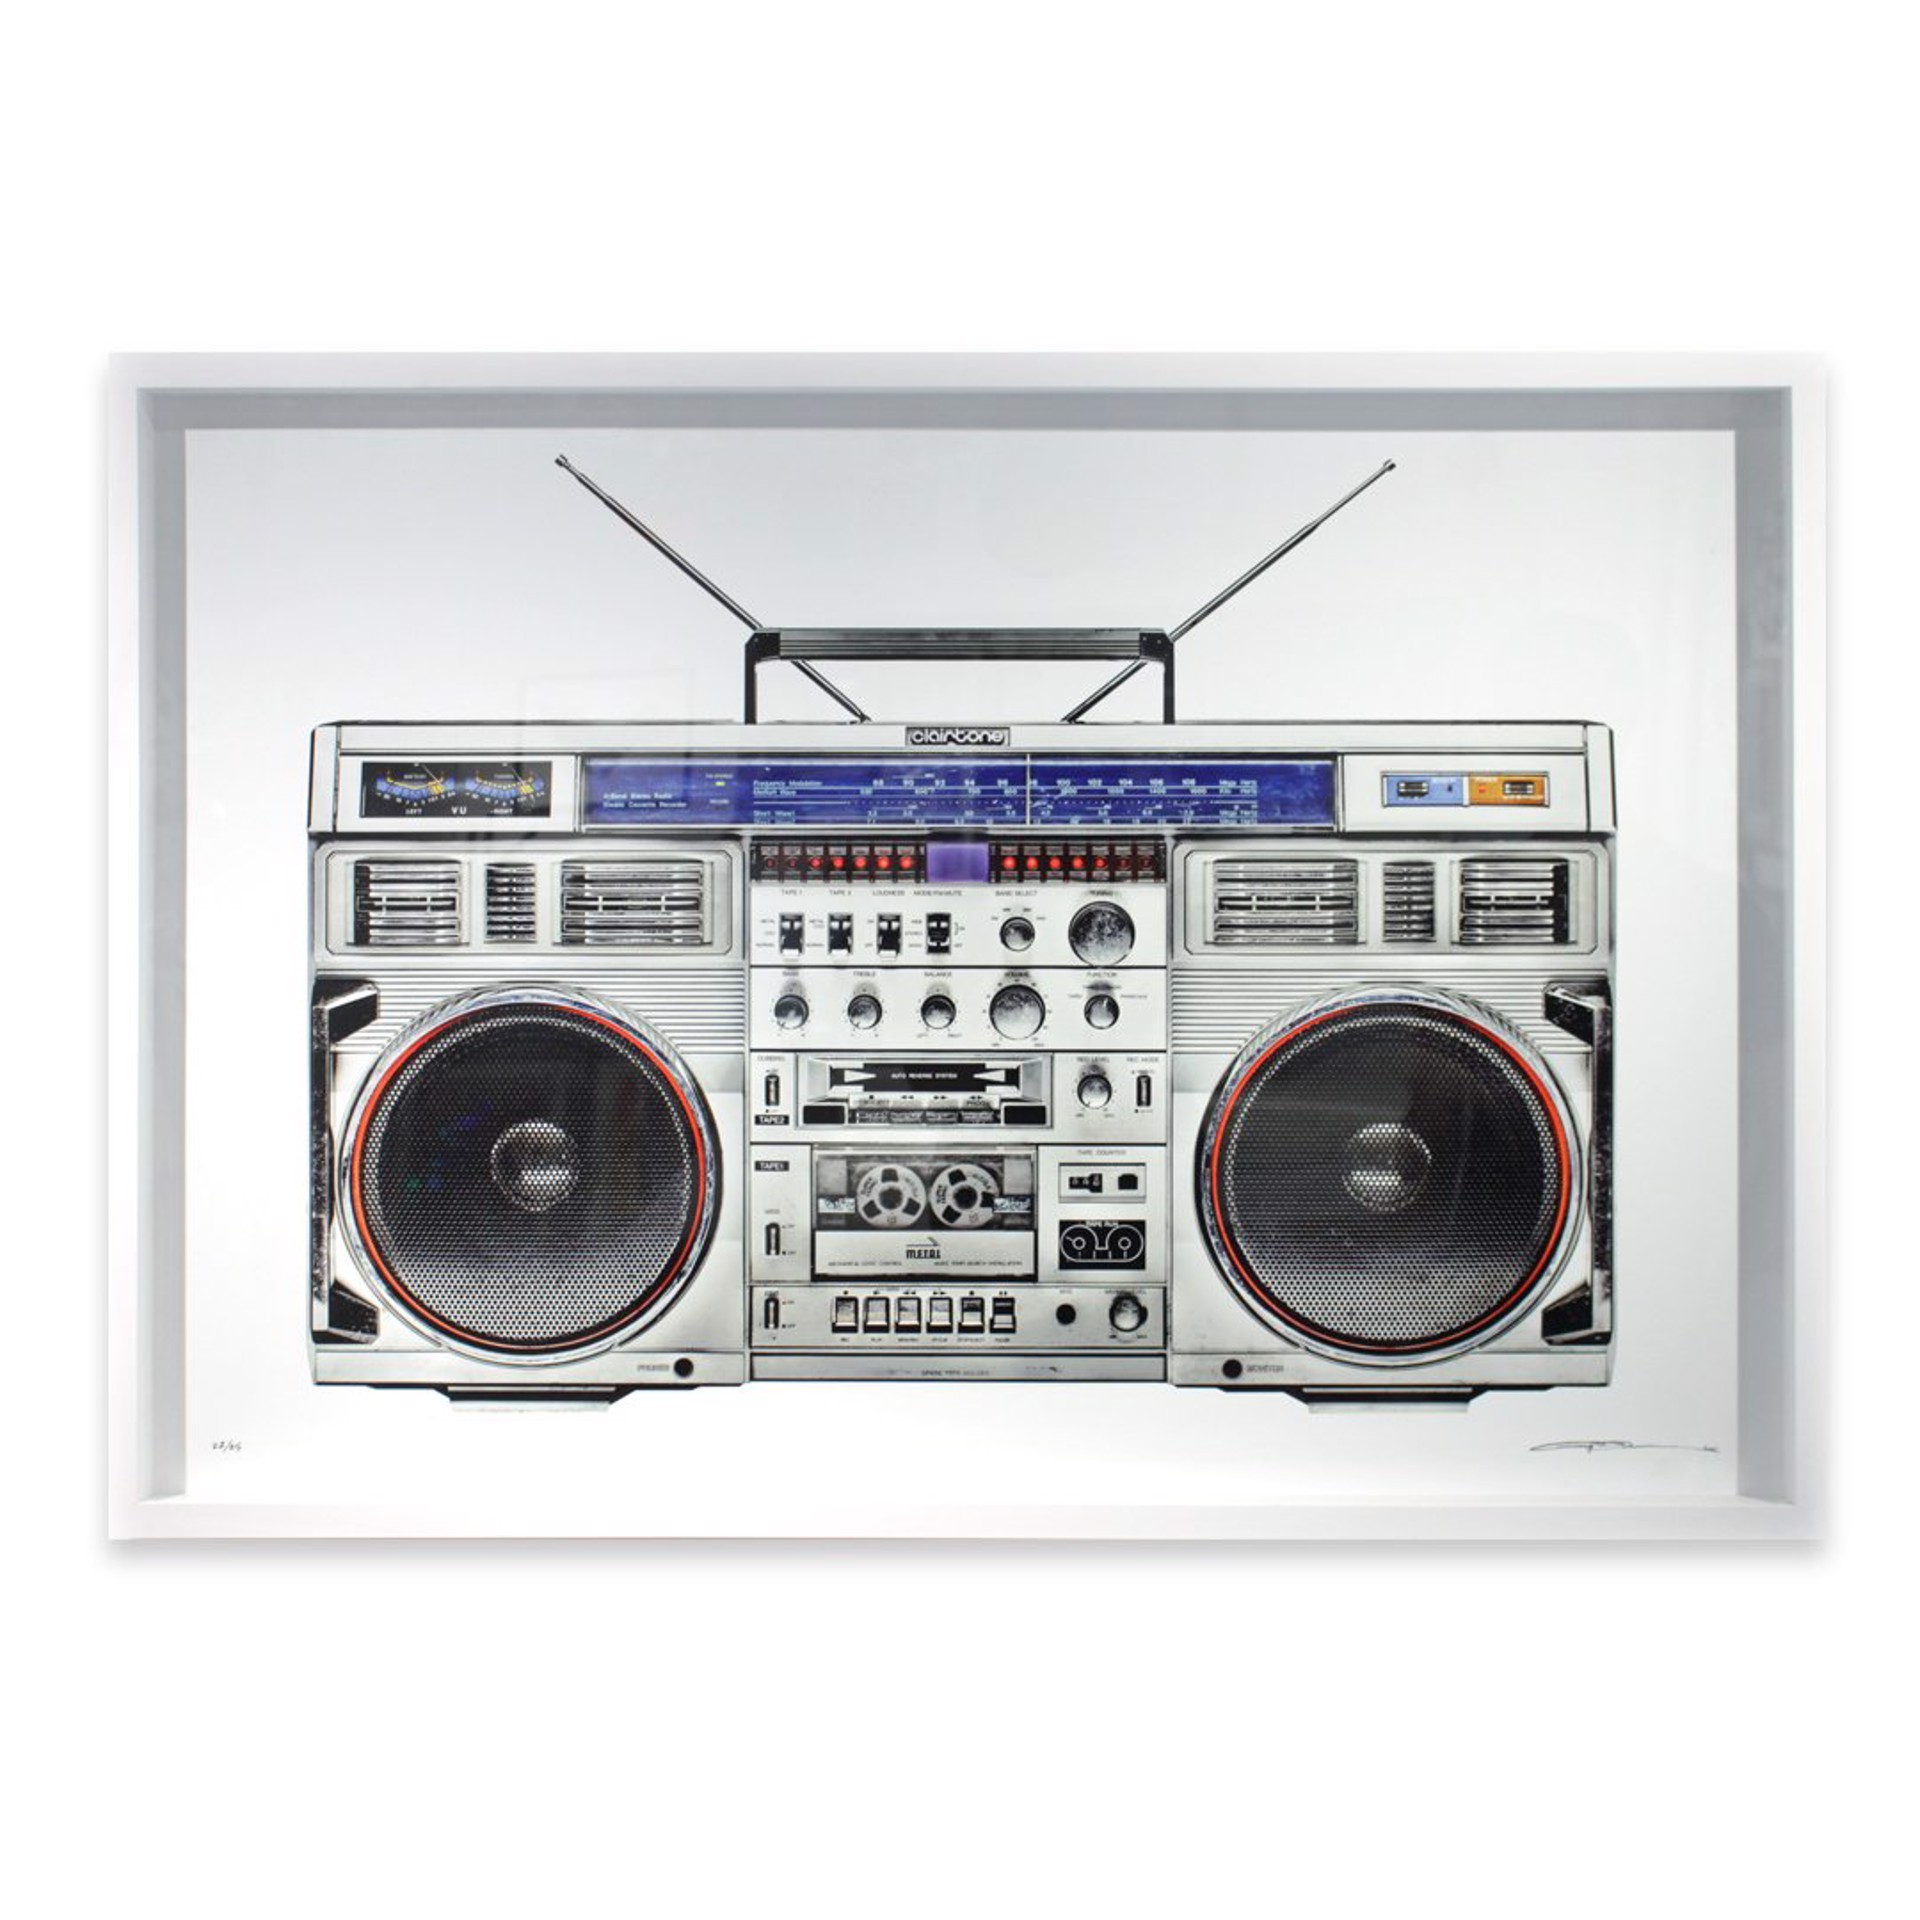 Boombox 24 by Lyle Owerko | Boomboxes